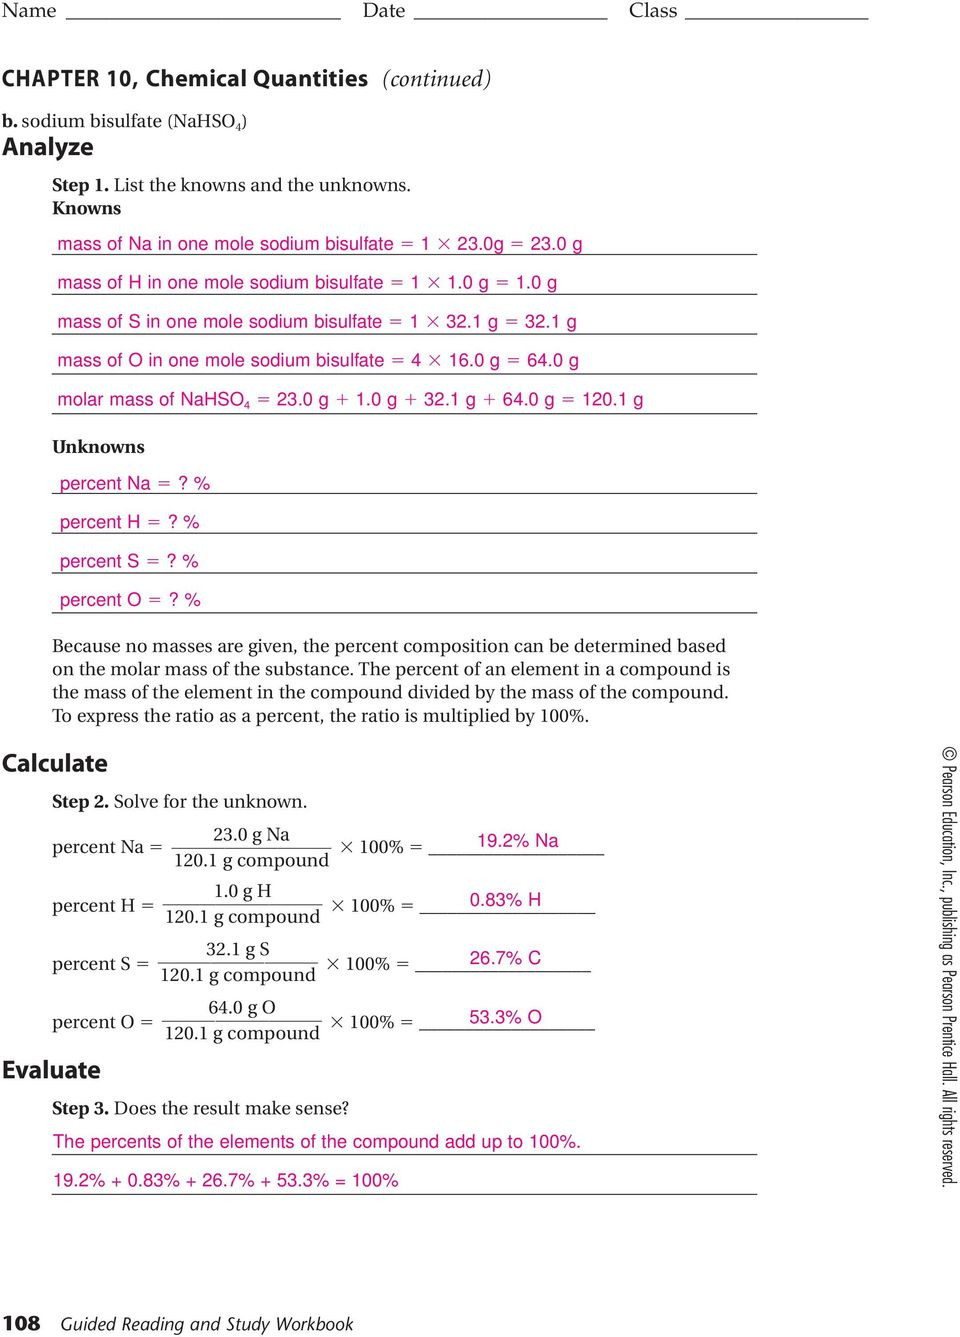 Percent Composition Worksheet Answers Section 103 Percent Position and Chemical formulas